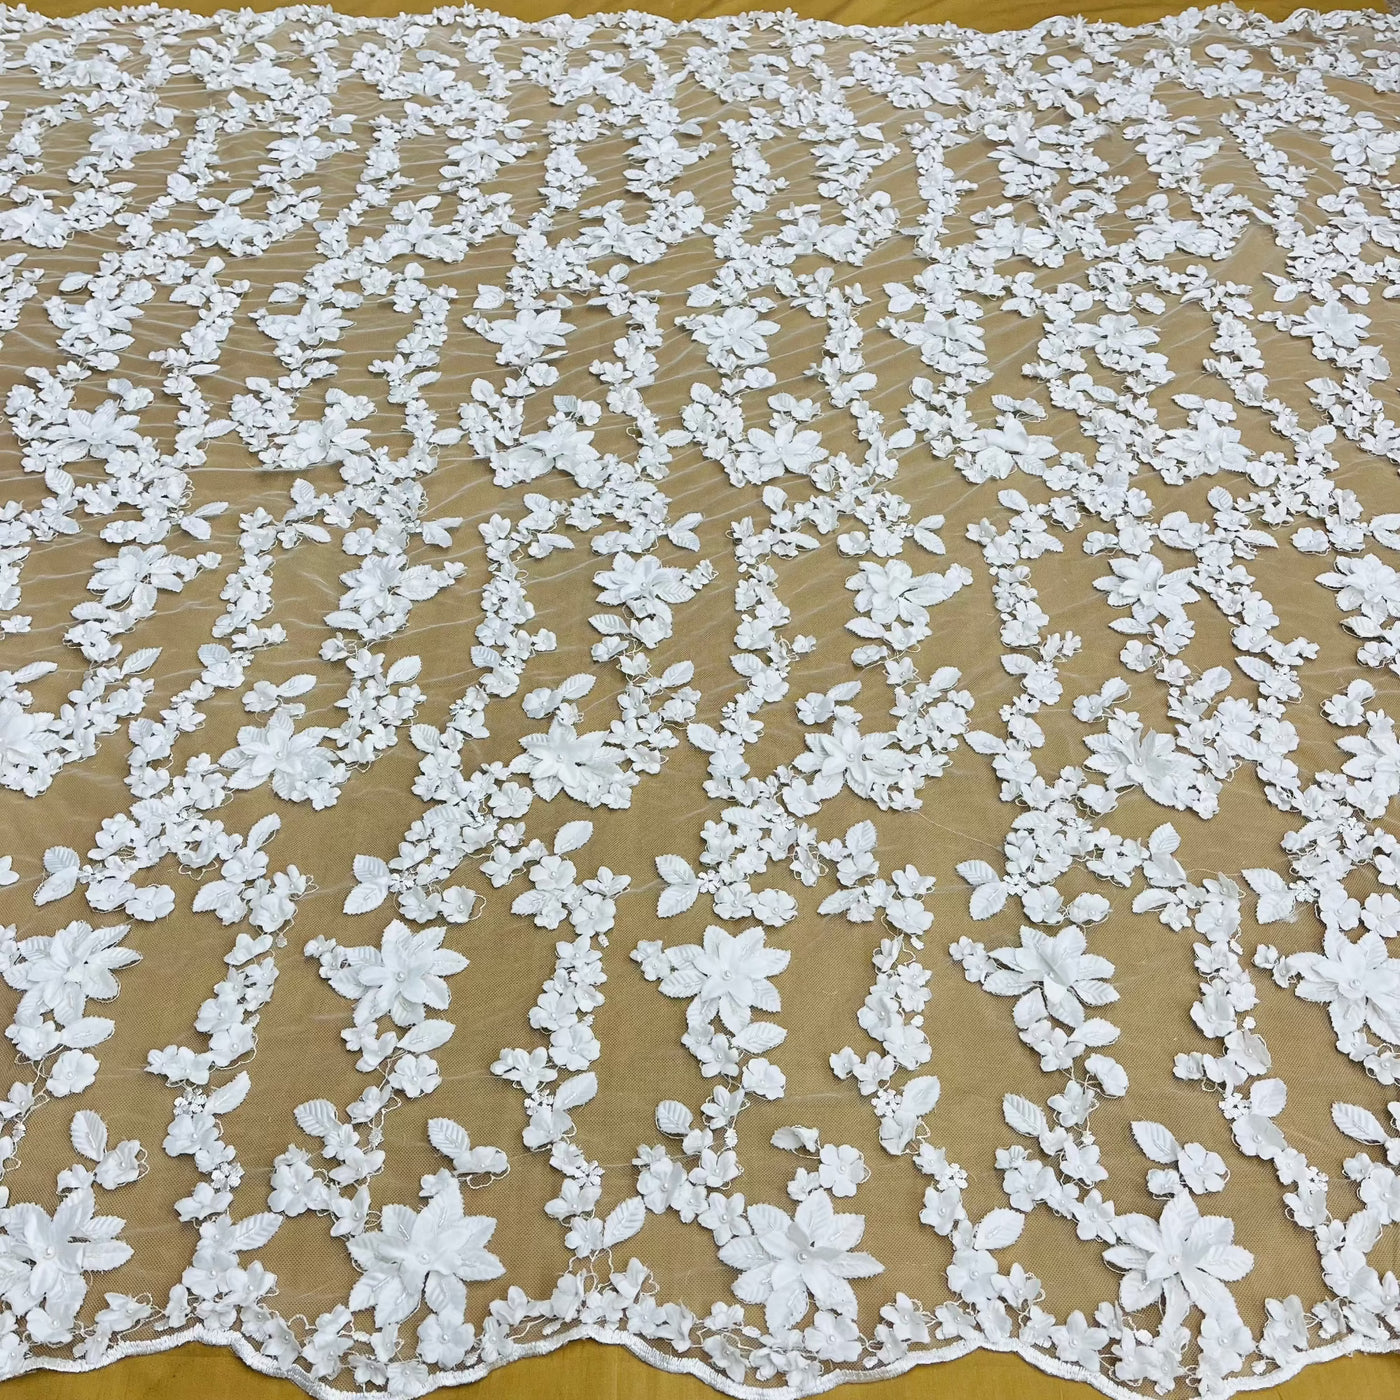 Beaded 3D Floral Lace Fabric Embroidered on 100% Polyester Net Mesh | Lace USA - GD-127 Off White